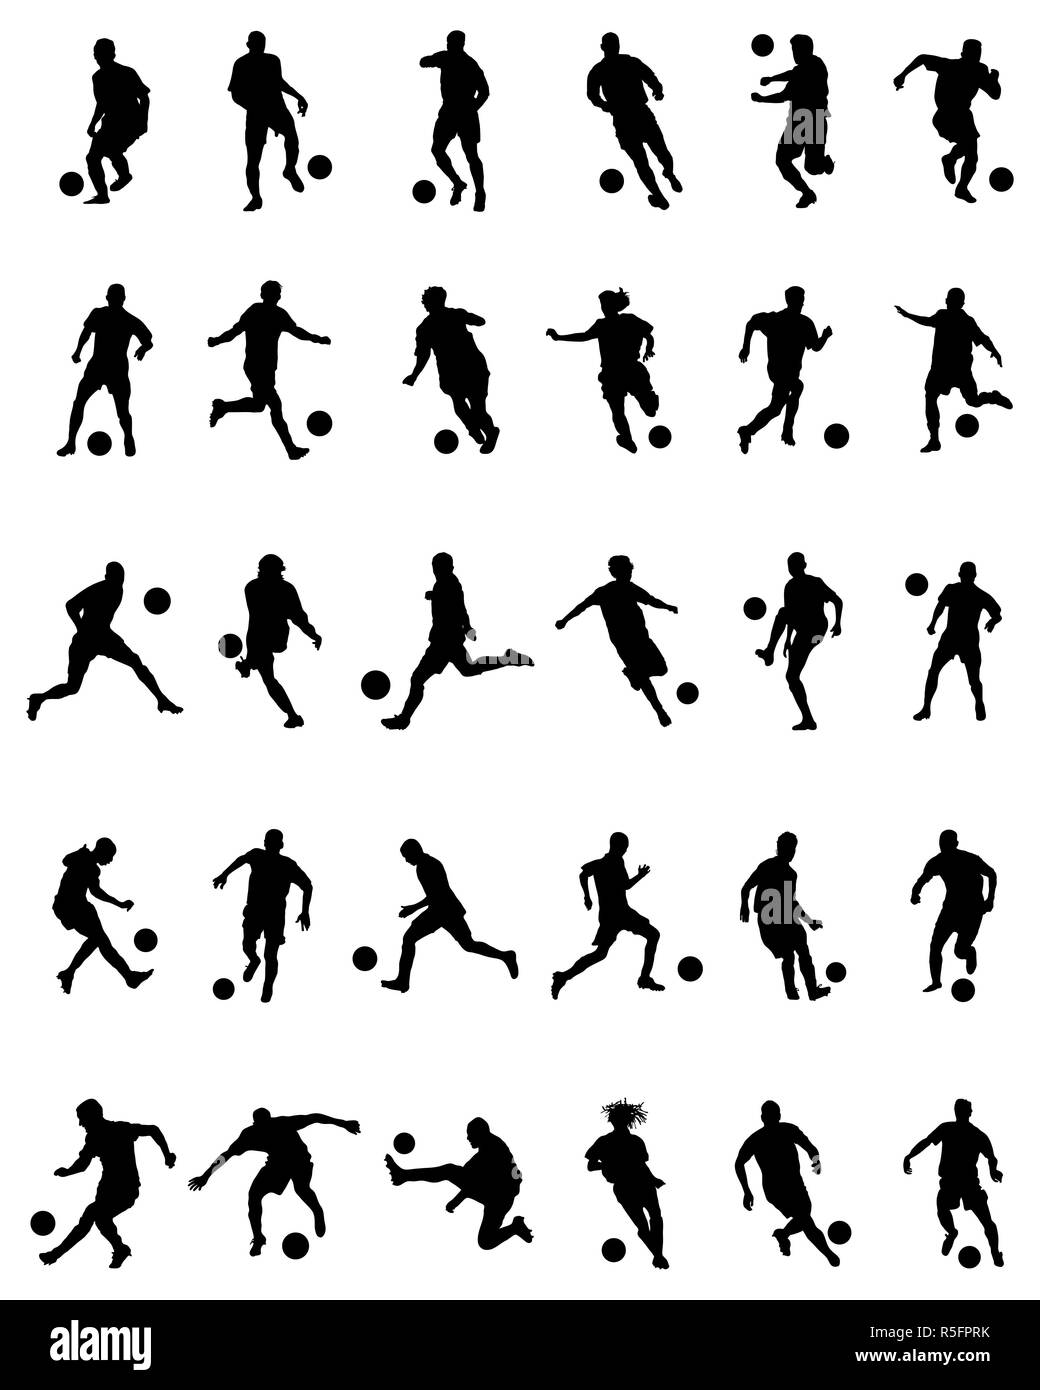 Black silhouettes of football players on a white background Stock Photo